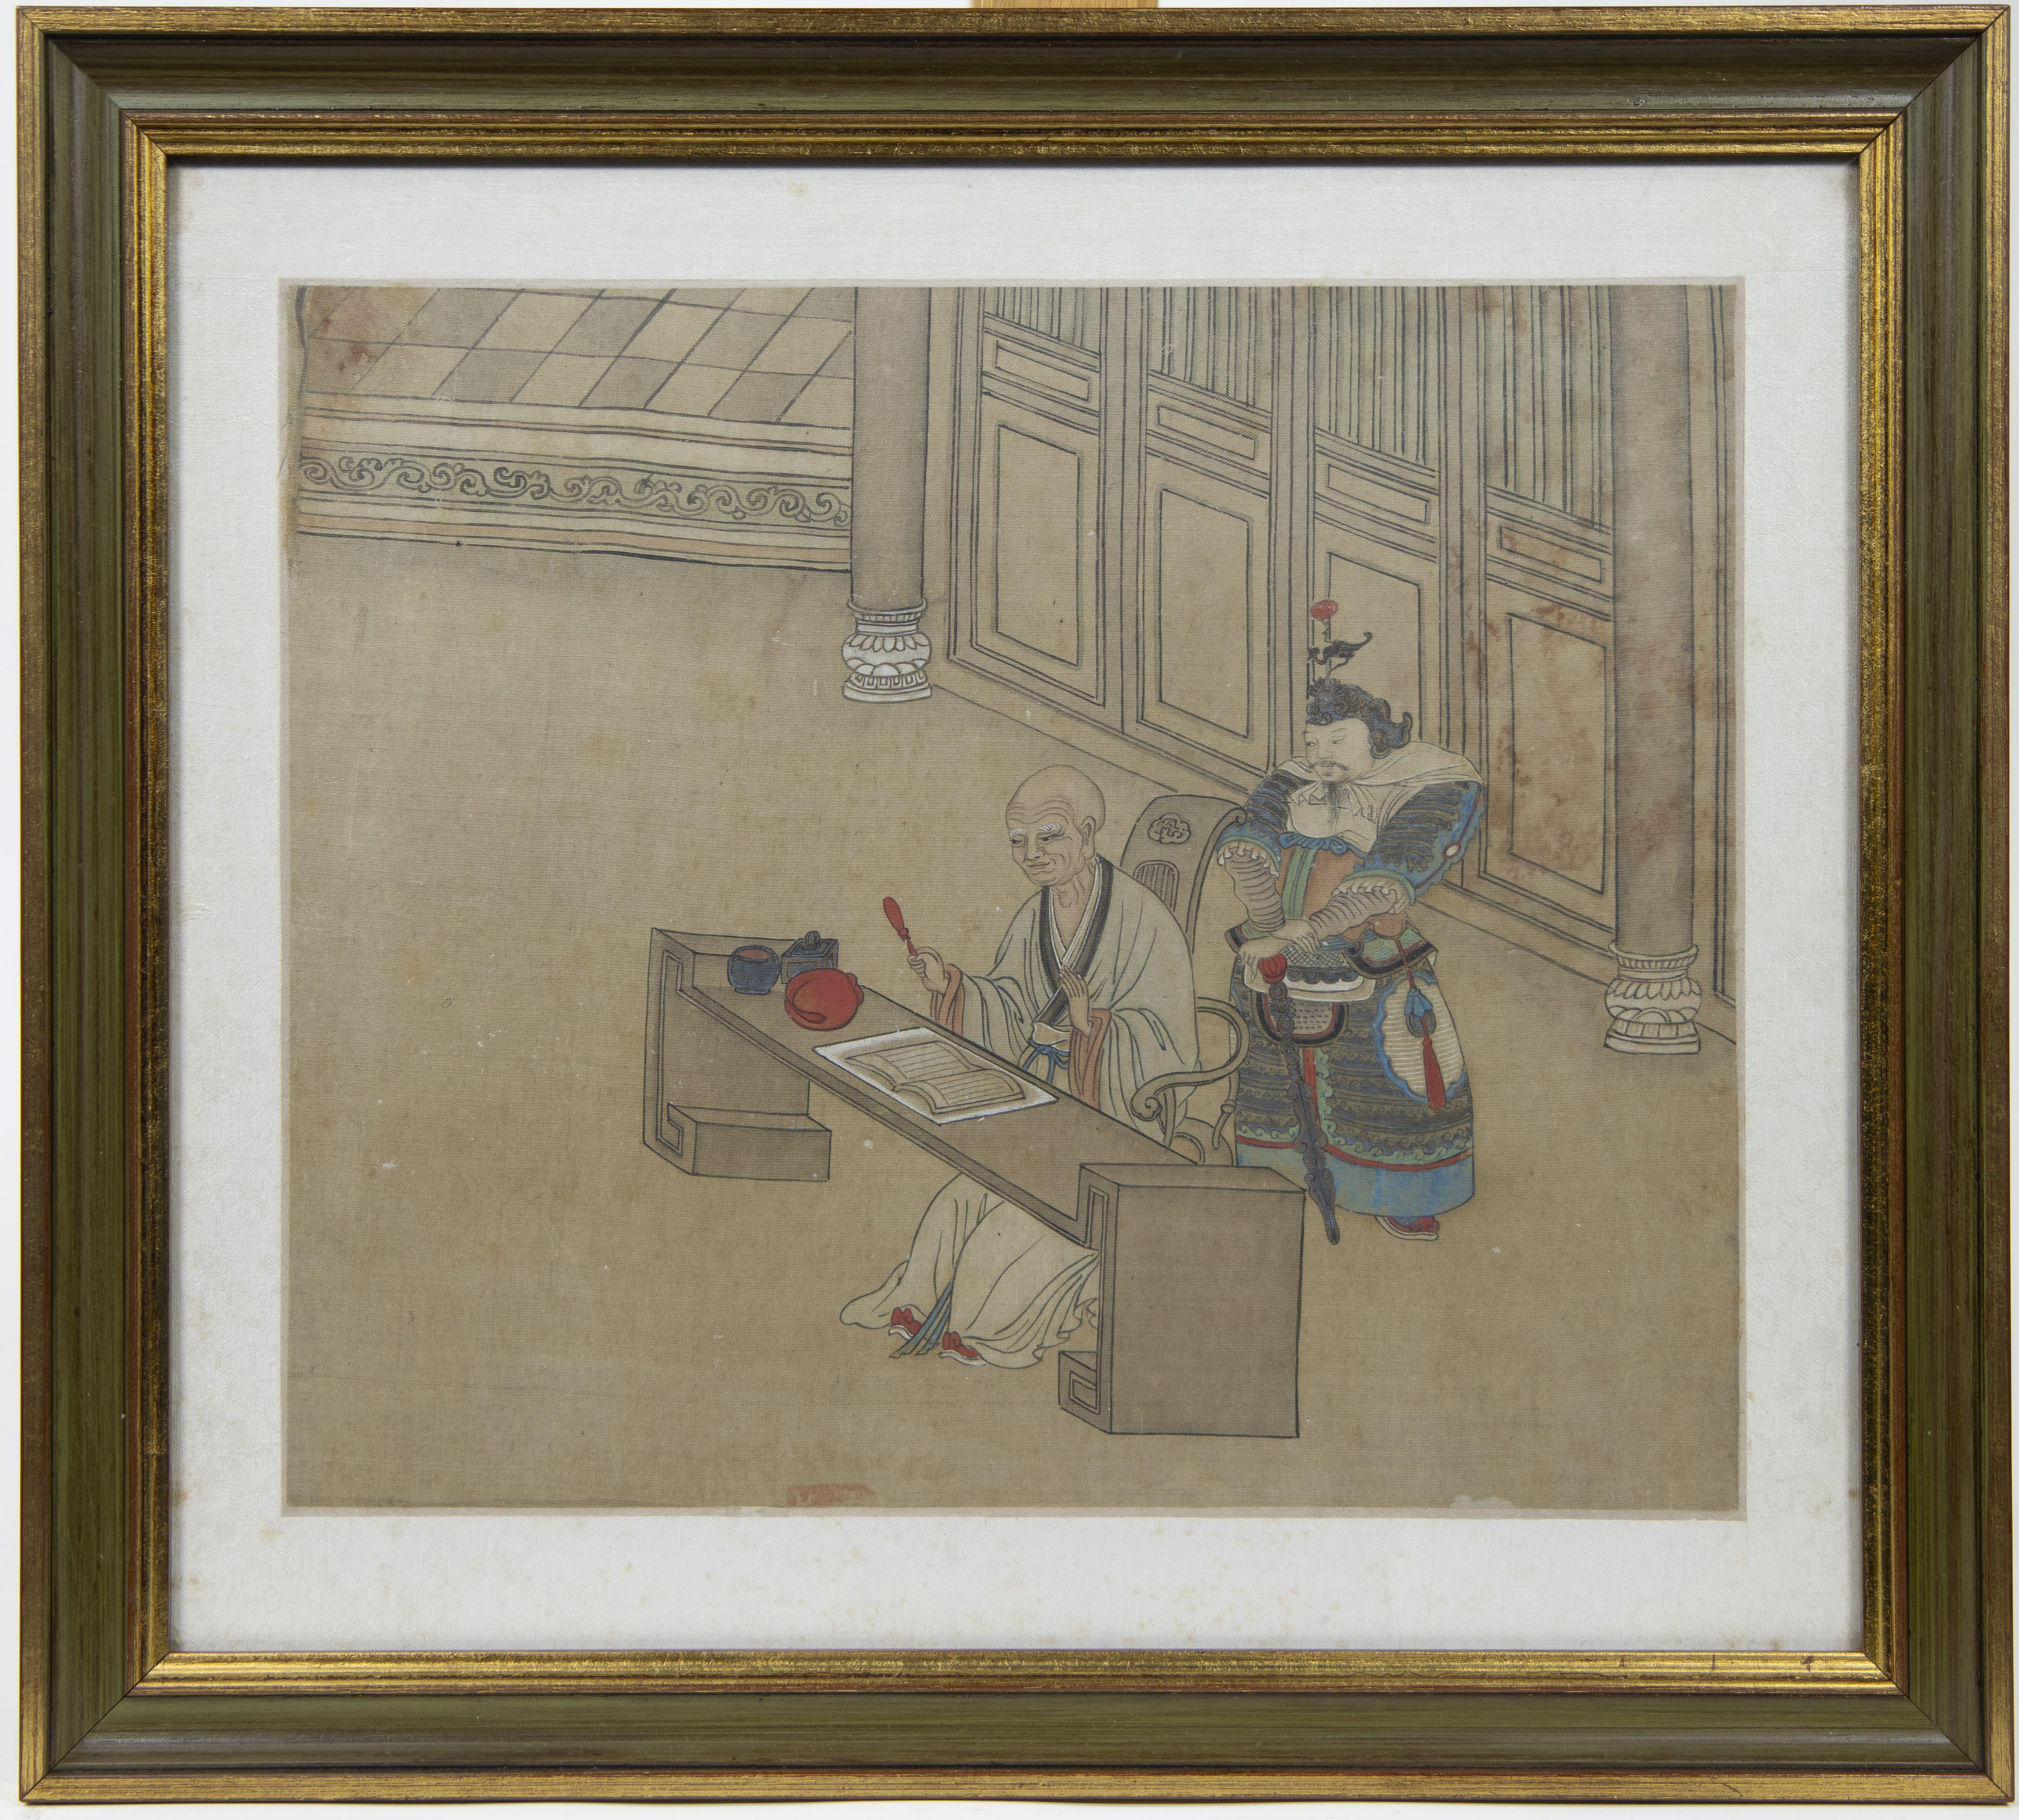 Set of 13 Chinese coloured drawings on silk, 19th century, some are signed - Image 3 of 17